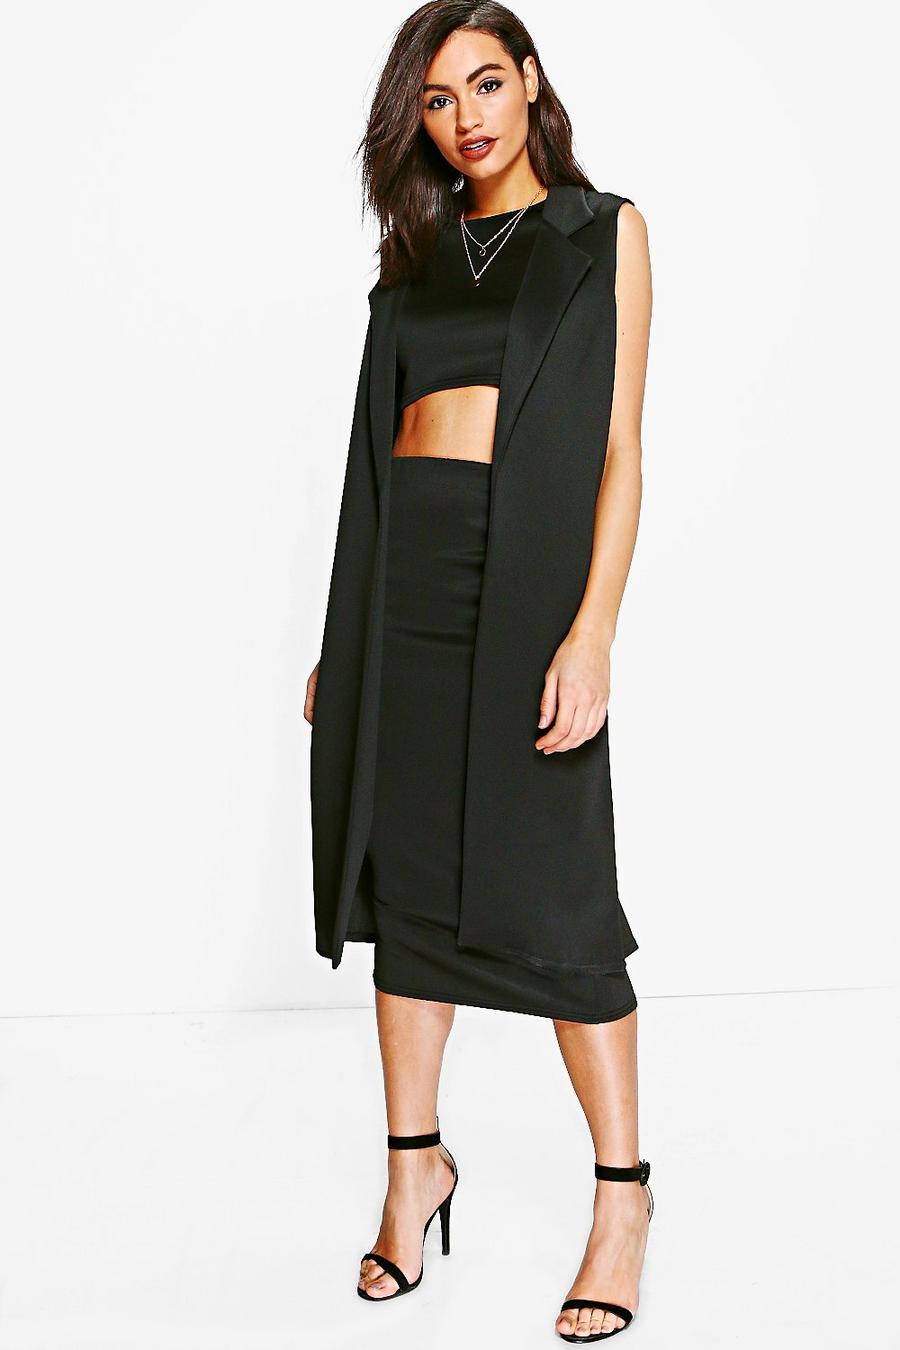 Daisy 3 Piece Crop, Skirt & Duster Co-ord image number 1